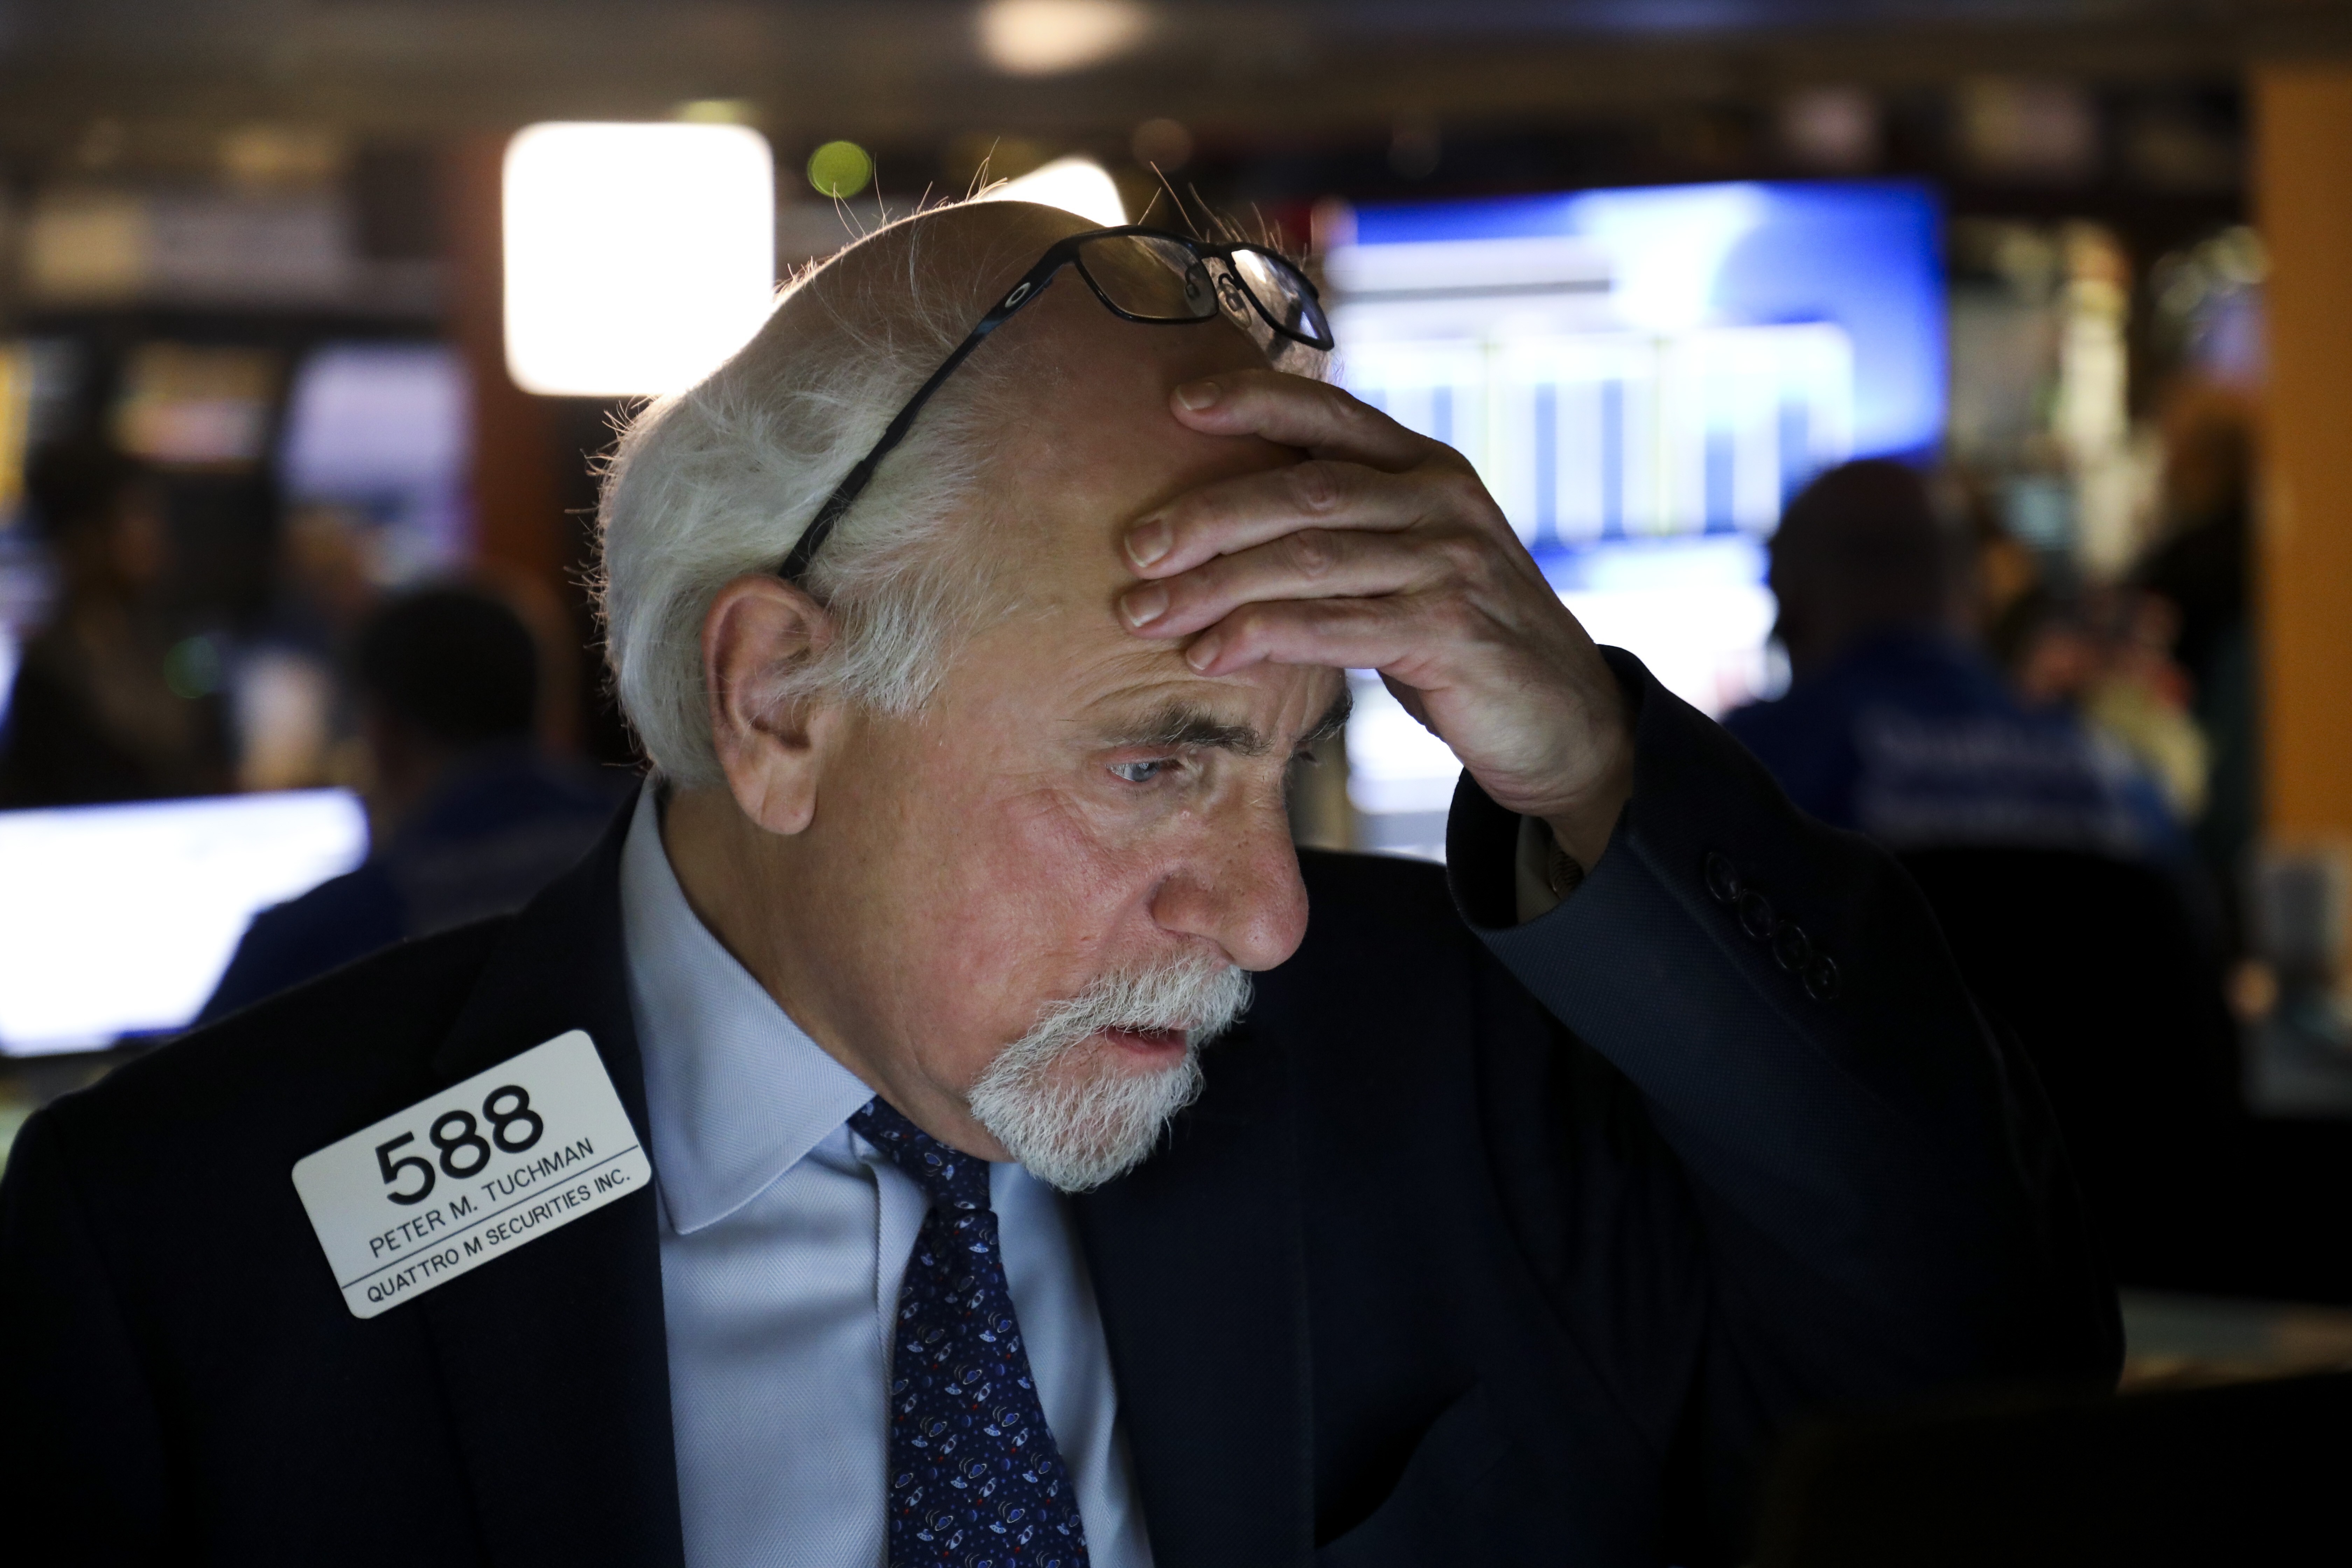 A trader on the trading floor of the New York Stock Exchange (NYSE) on March 9, 2020. Photo: Xinhua